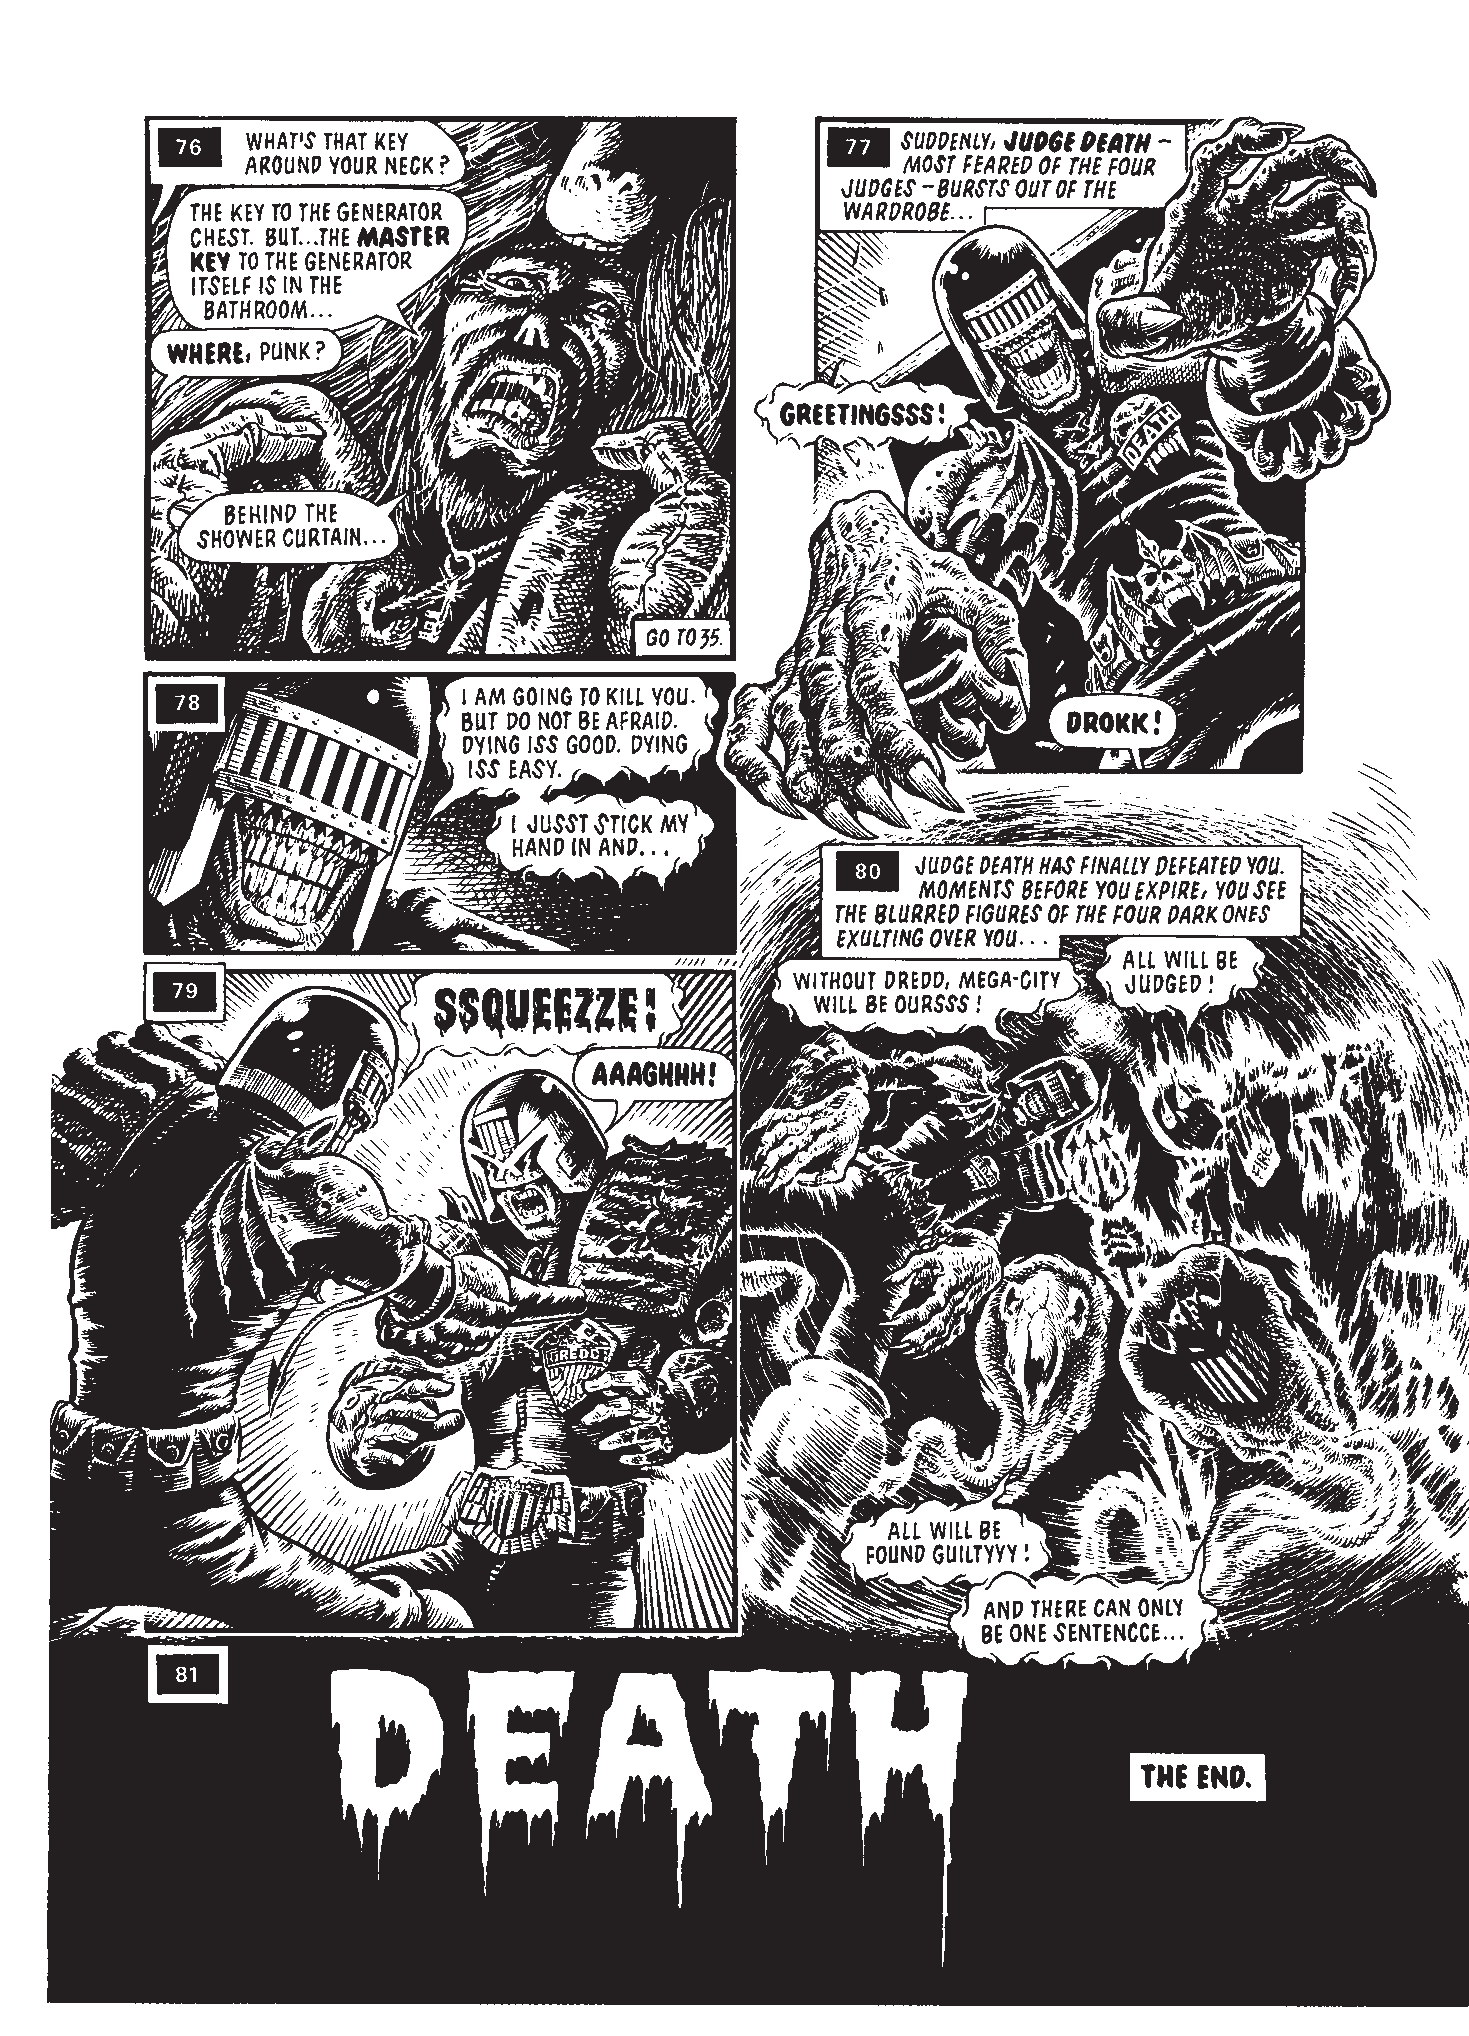 Read online Judge Dredd: The Restricted Files comic -  Issue # TPB 4 - 234